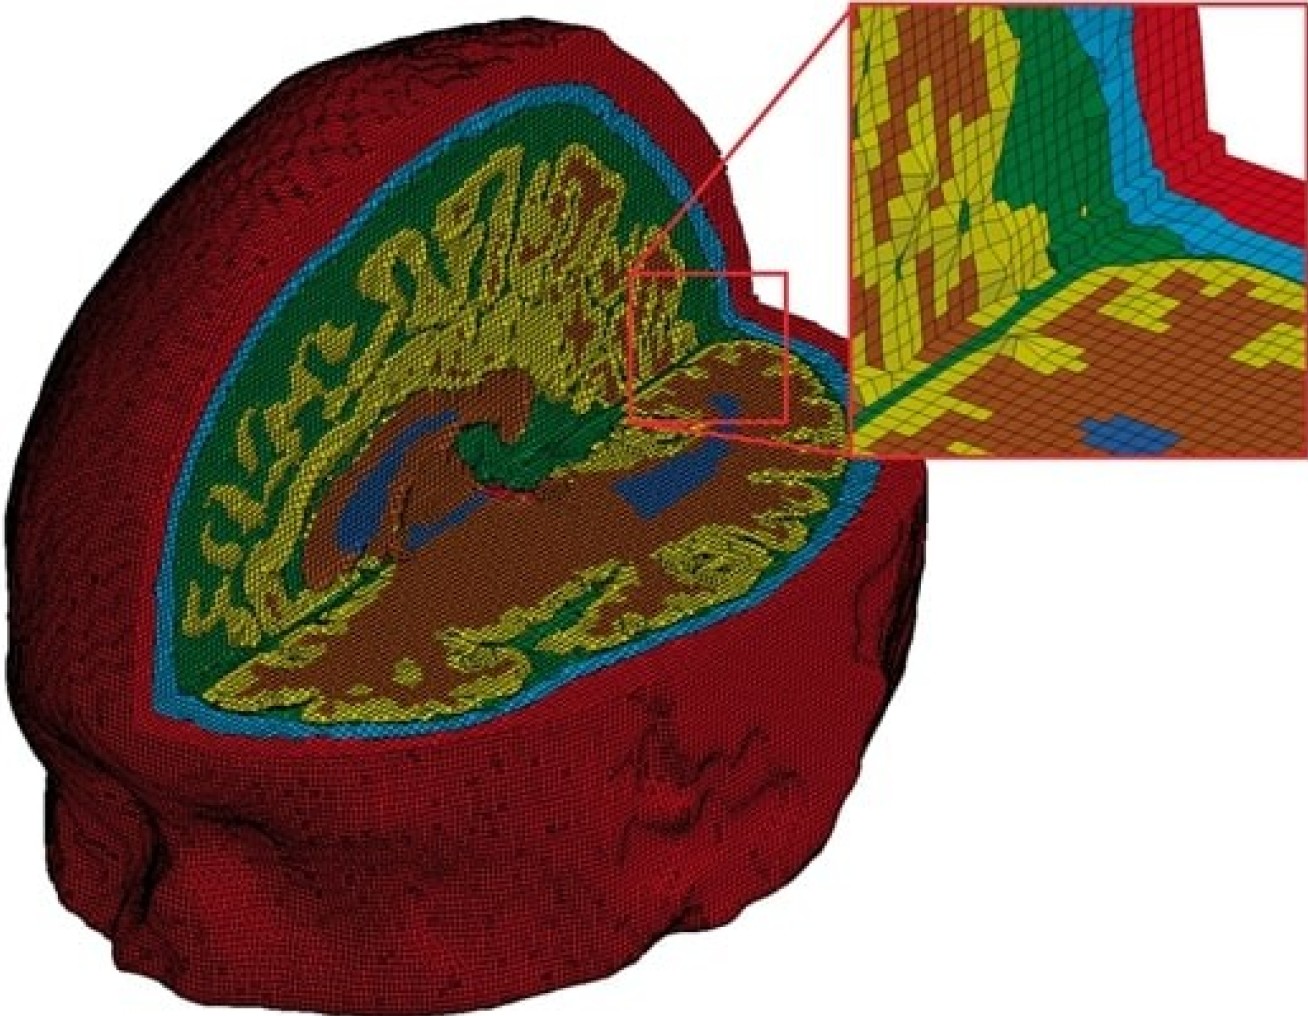 Image of the 3D modelling system used to examine the brain after injury.